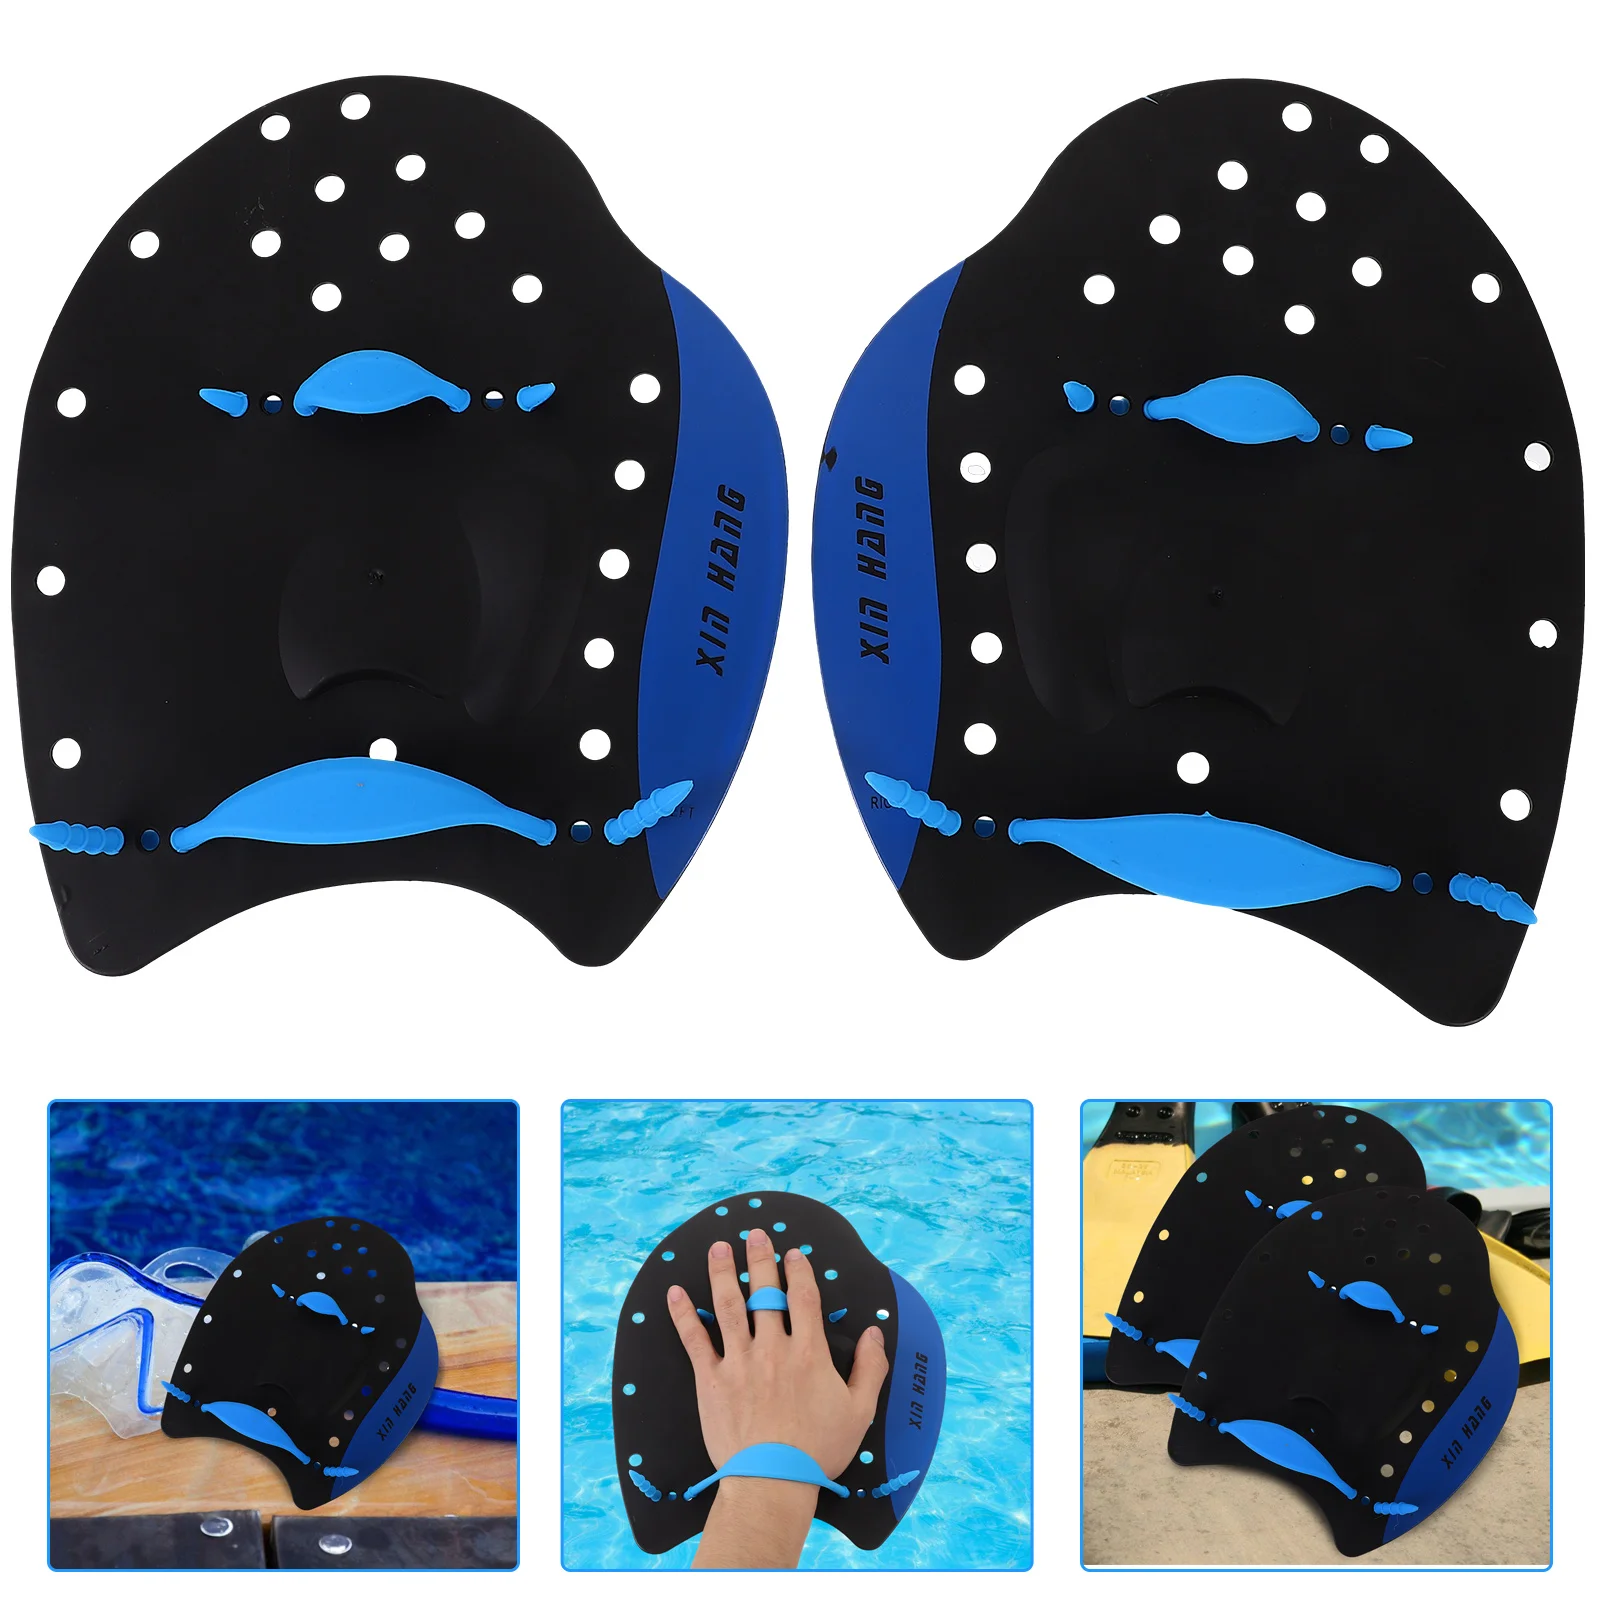 1 Pair Gloves For Kids Hand Swimming Training Tool Hand Paddles with Adjustable Straps Hand Paddles for Beginners and Men Size hckg calligraphy dictionary beginners entry nine body copy practice book famous tutorial tool brush copybook